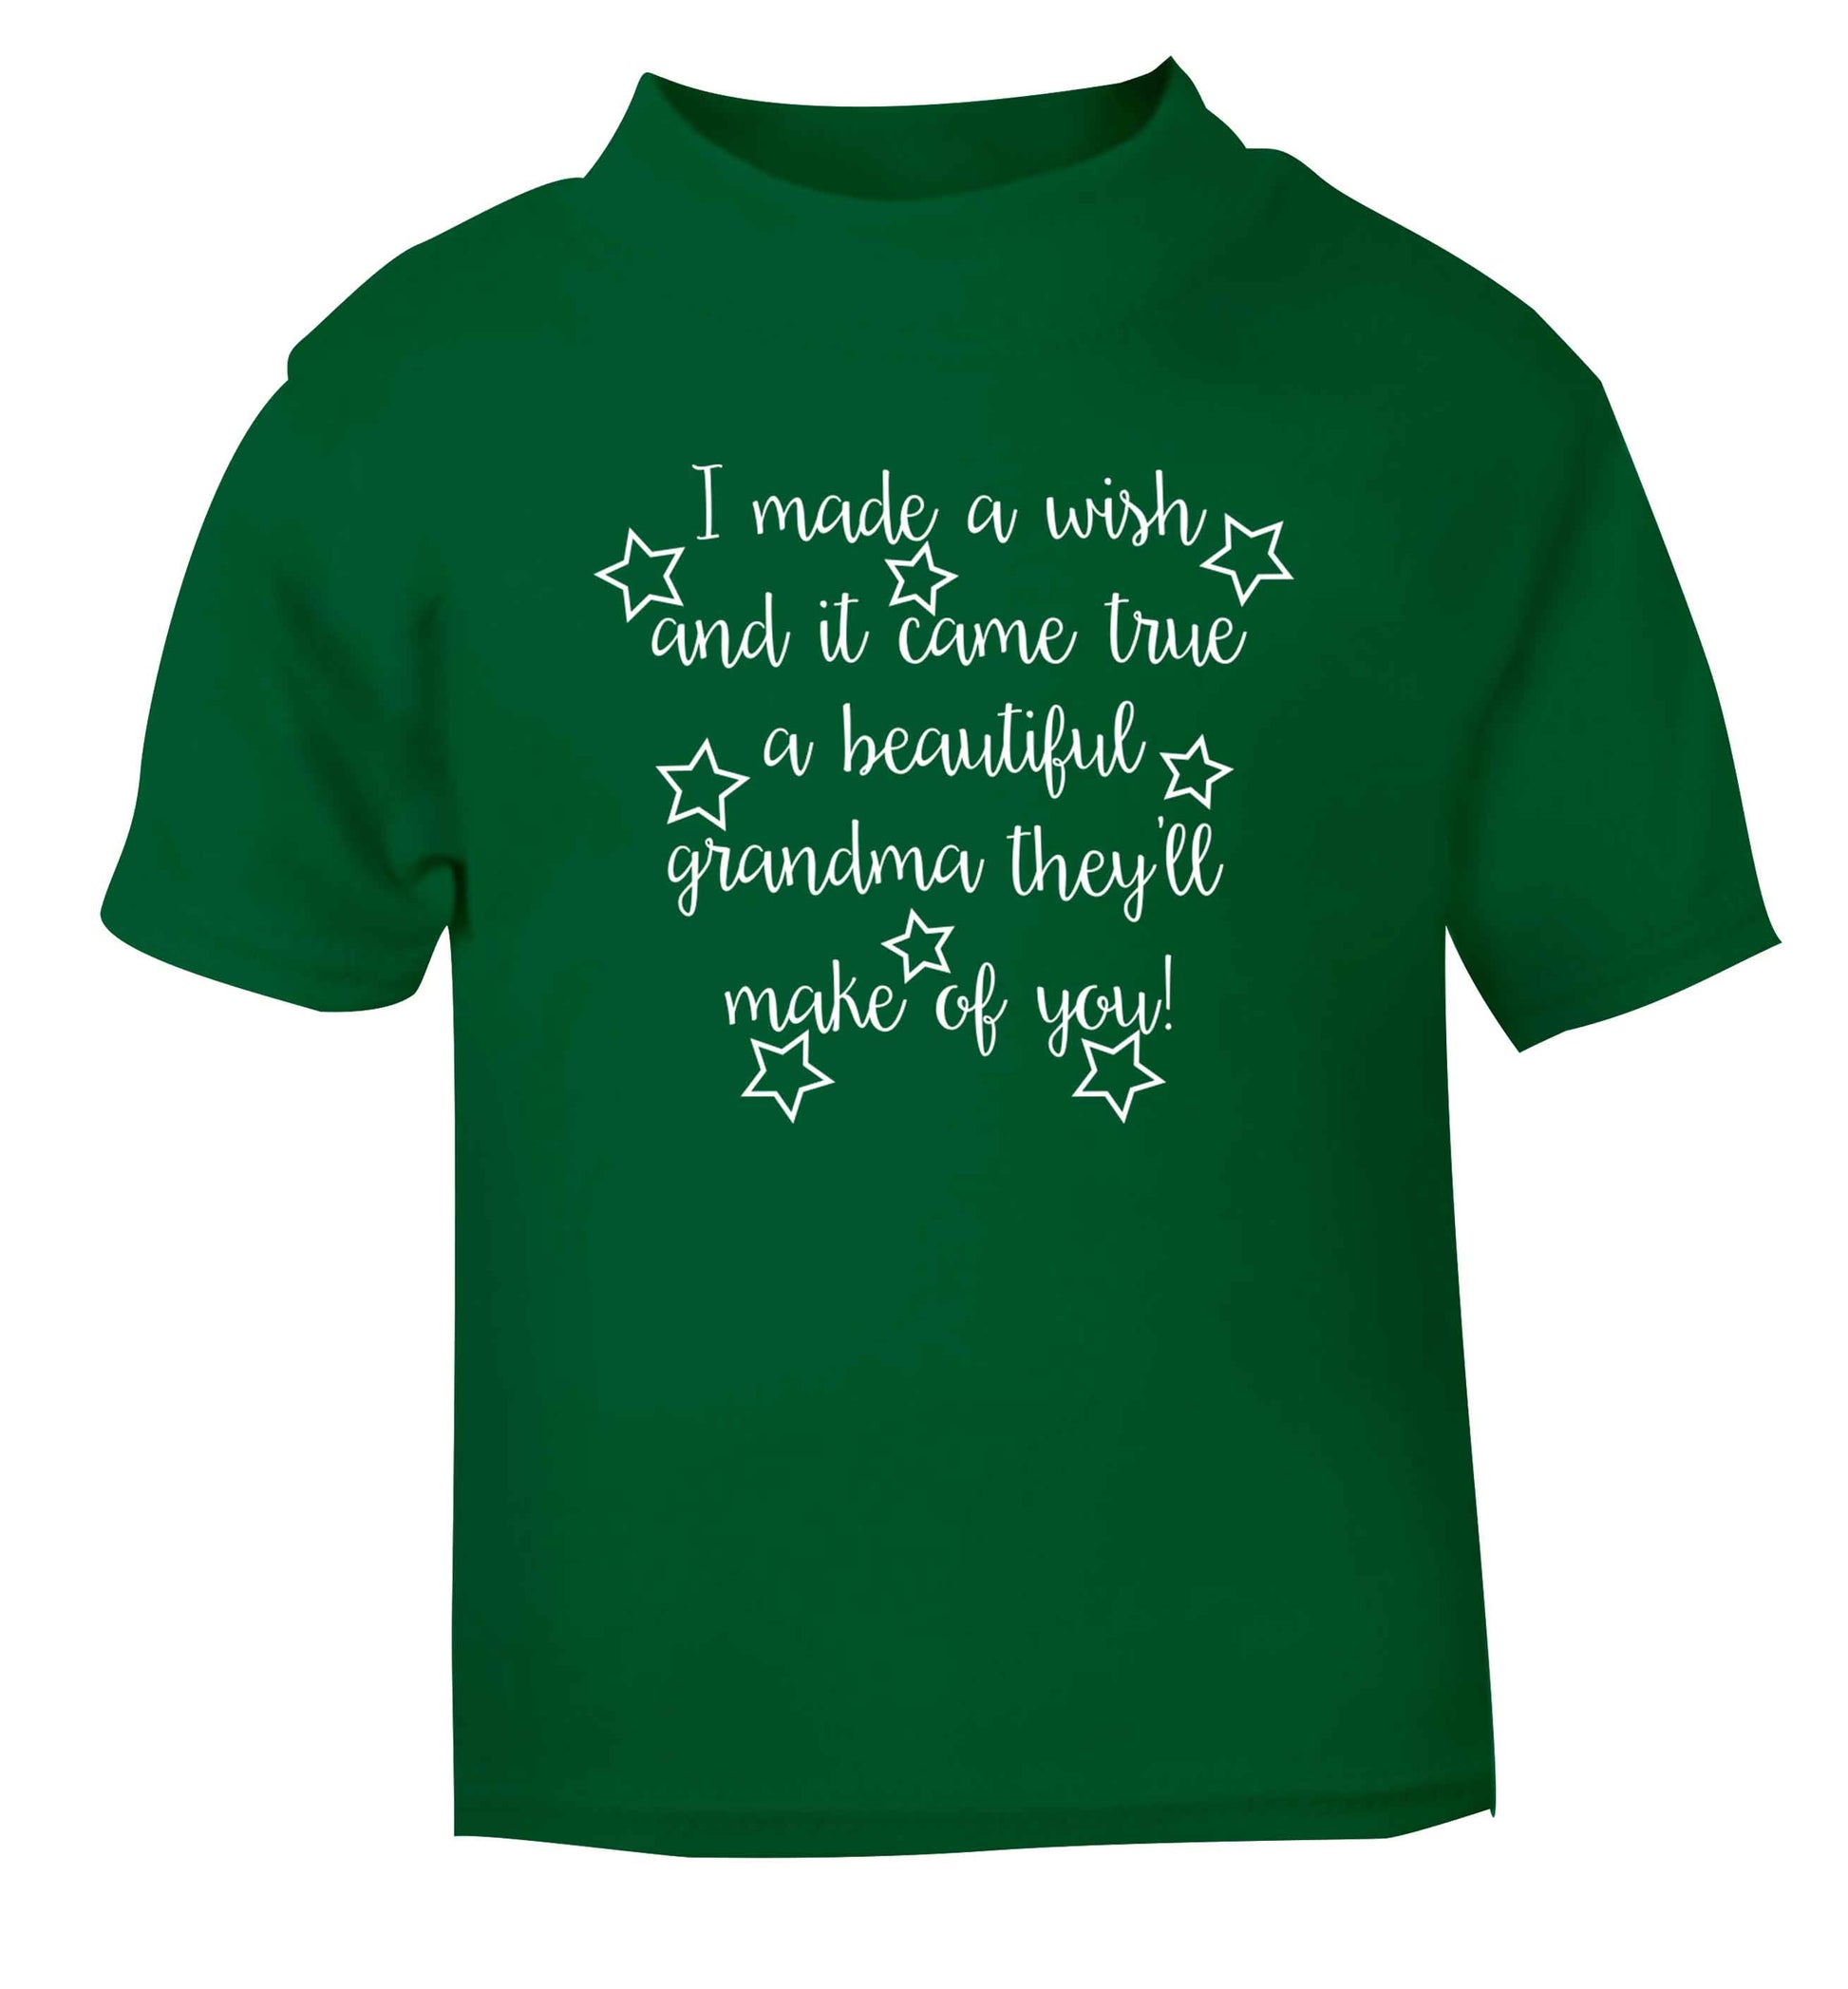 I made a wish and it came true a beautiful grandma they'll make of you! green Baby Toddler Tshirt 2 Years